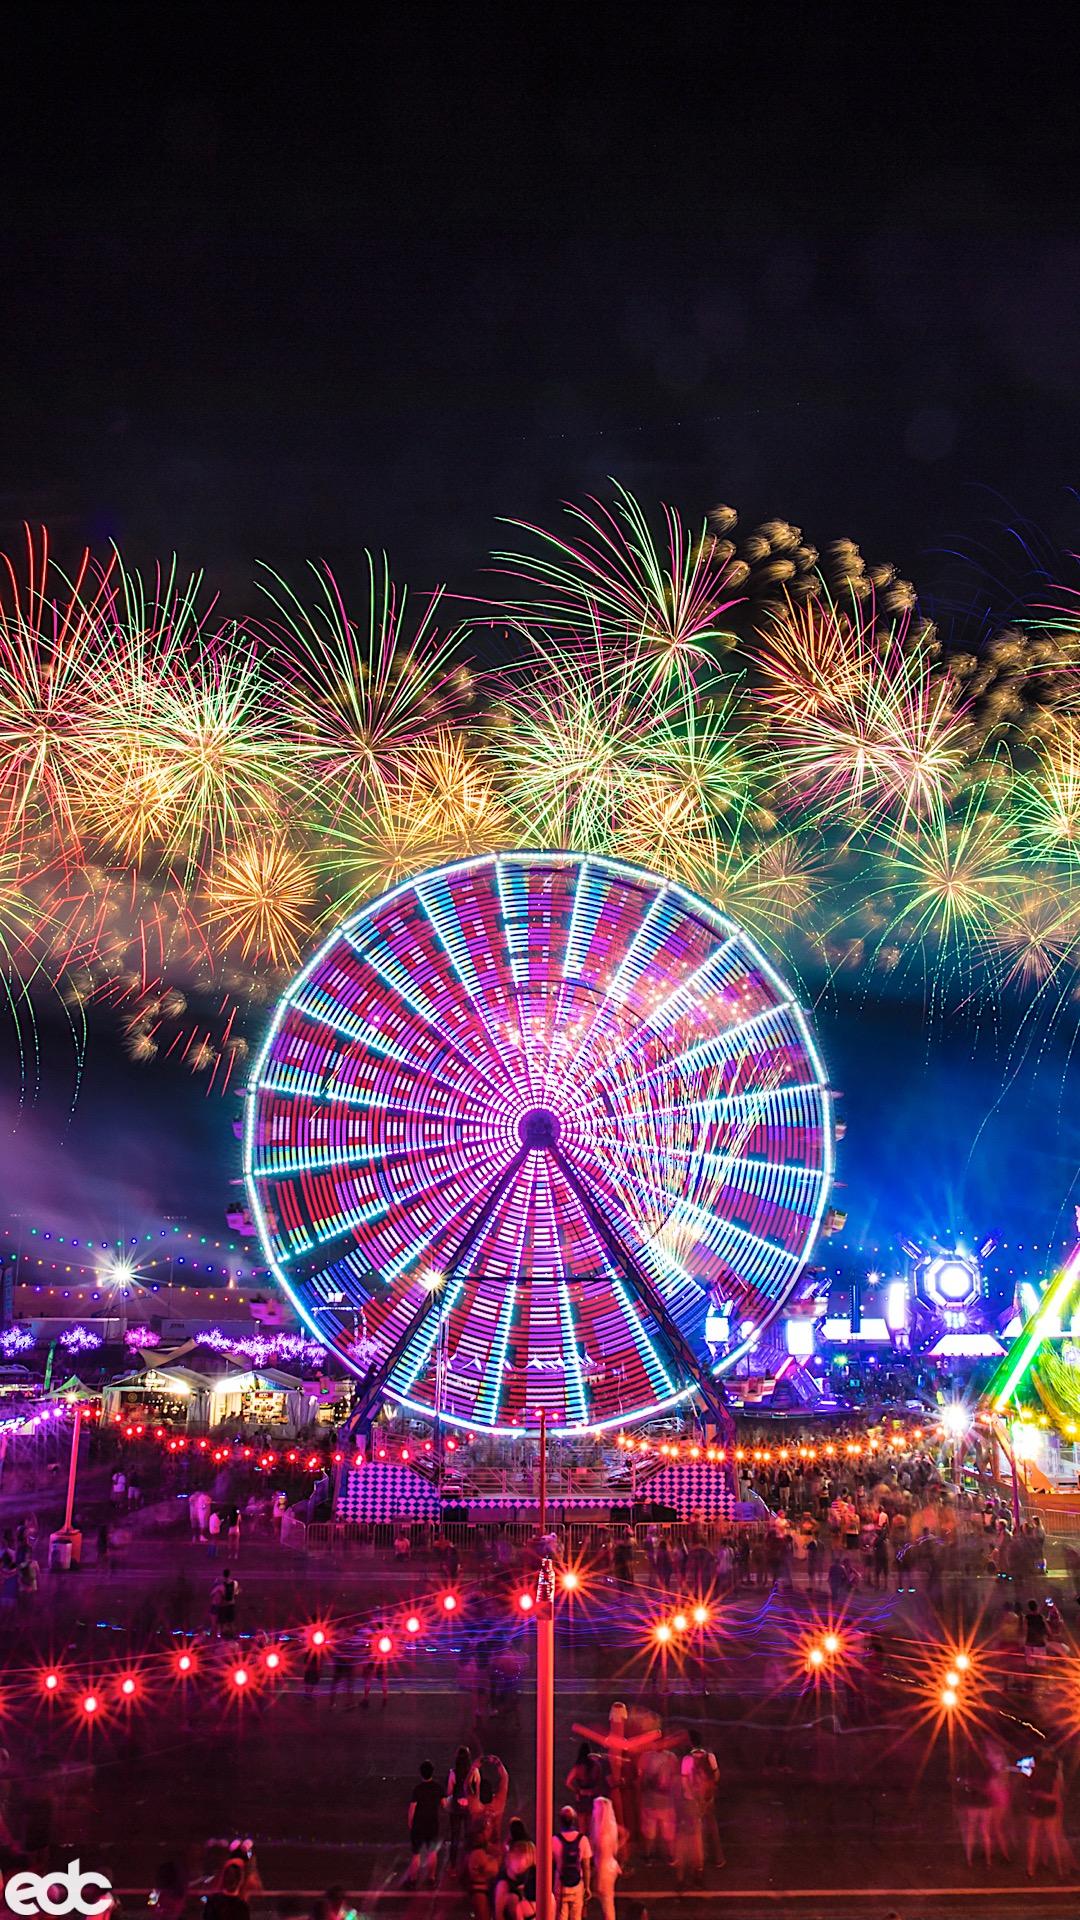 Download These Epic EDC Las Vegas Wallpapers for Your Phone